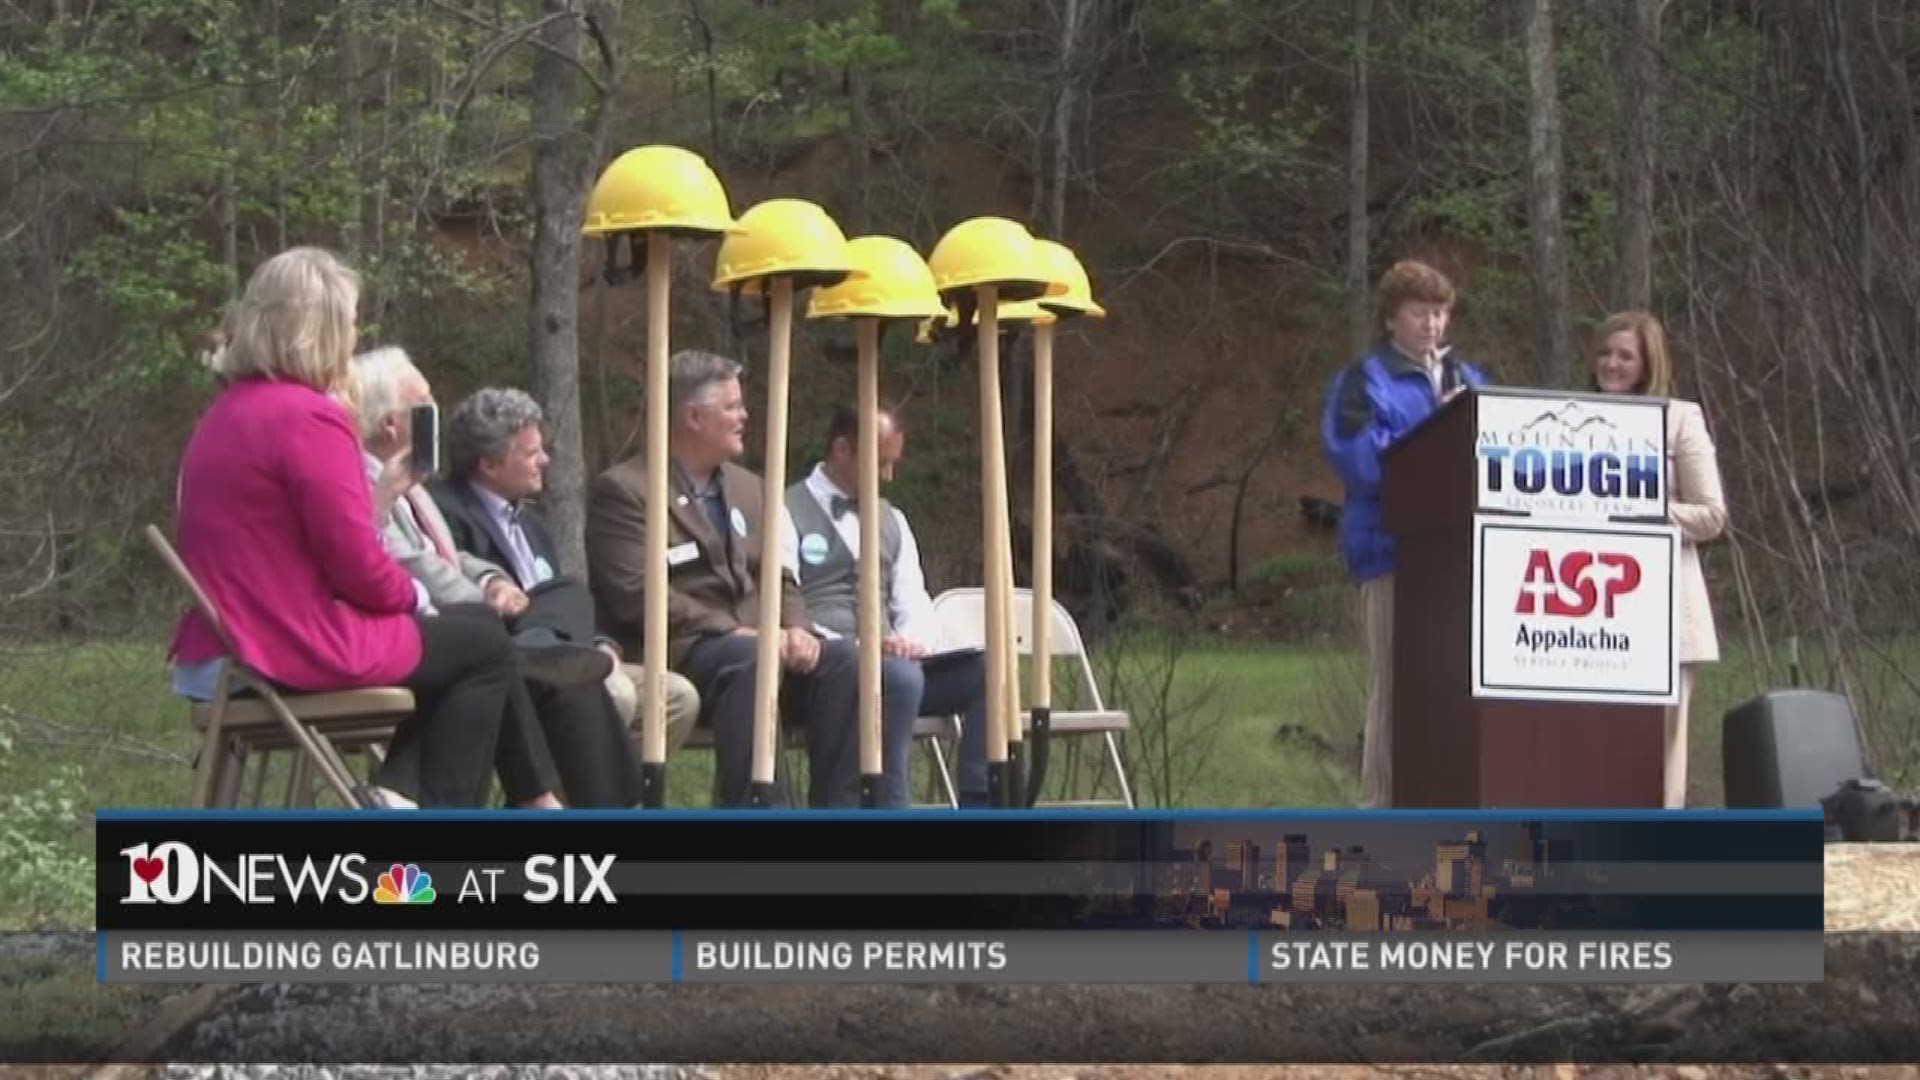 April 25, 2017: The Mountain Tough Recovery Team broke ground on its first new home in Gatlinburg following last year's wildfires.